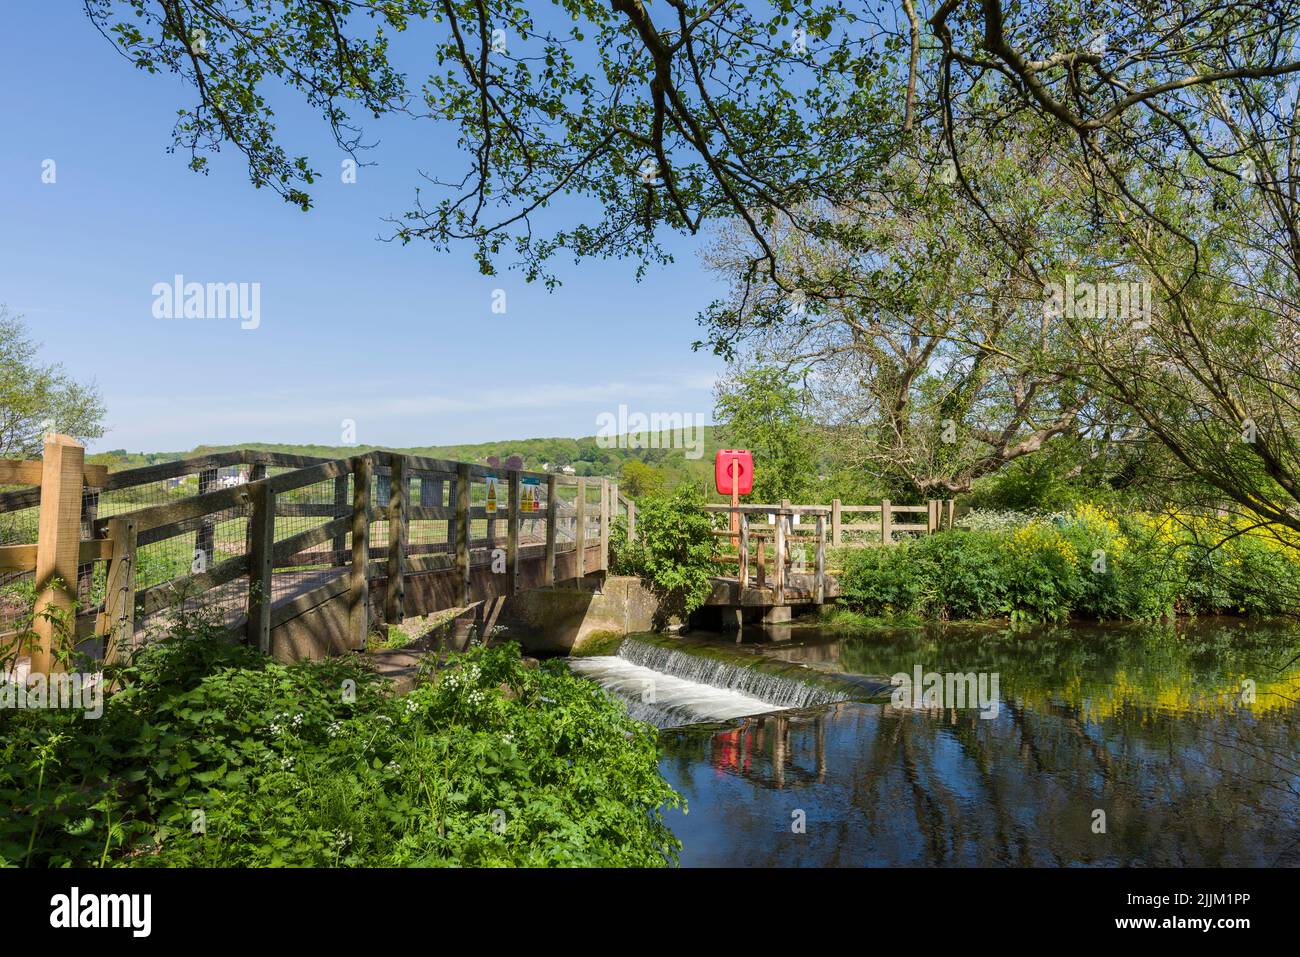 The footbridge over the weir on the River Yeo, also known as the Congresbury Yeo, at Congresbury, North Somerset, England. Stock Photo